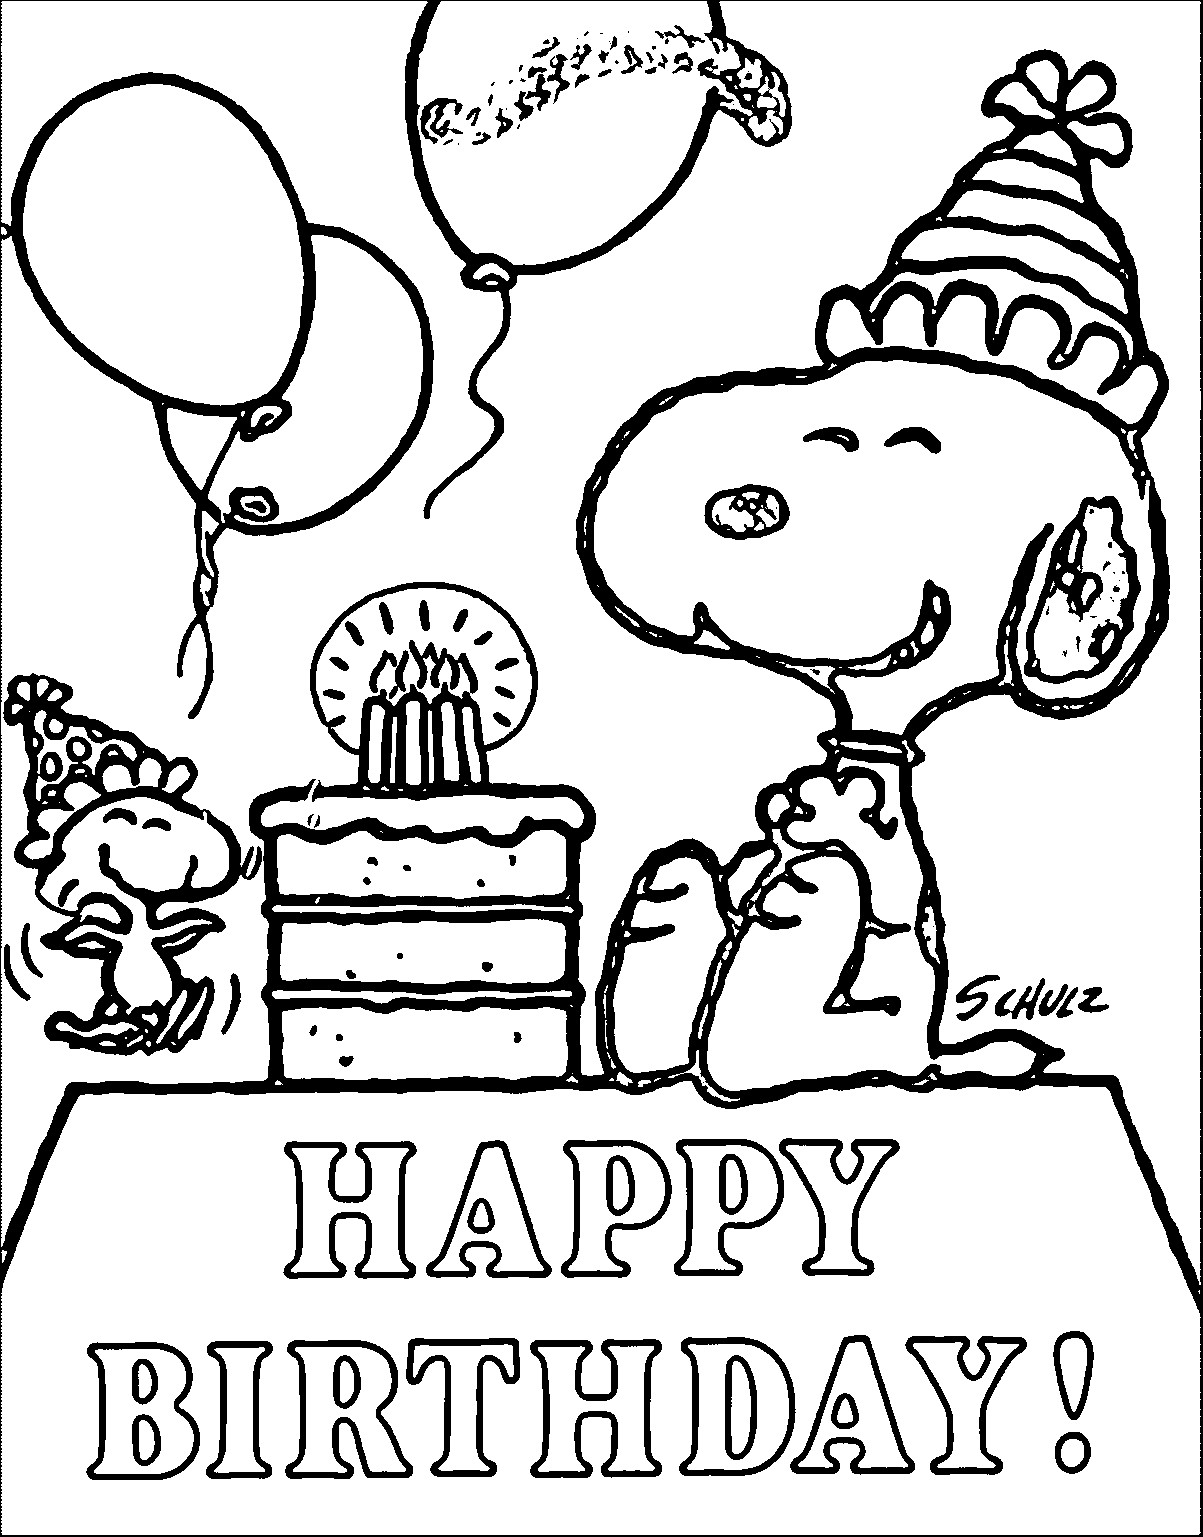 Happy Birthday Snoopy Coloring Page